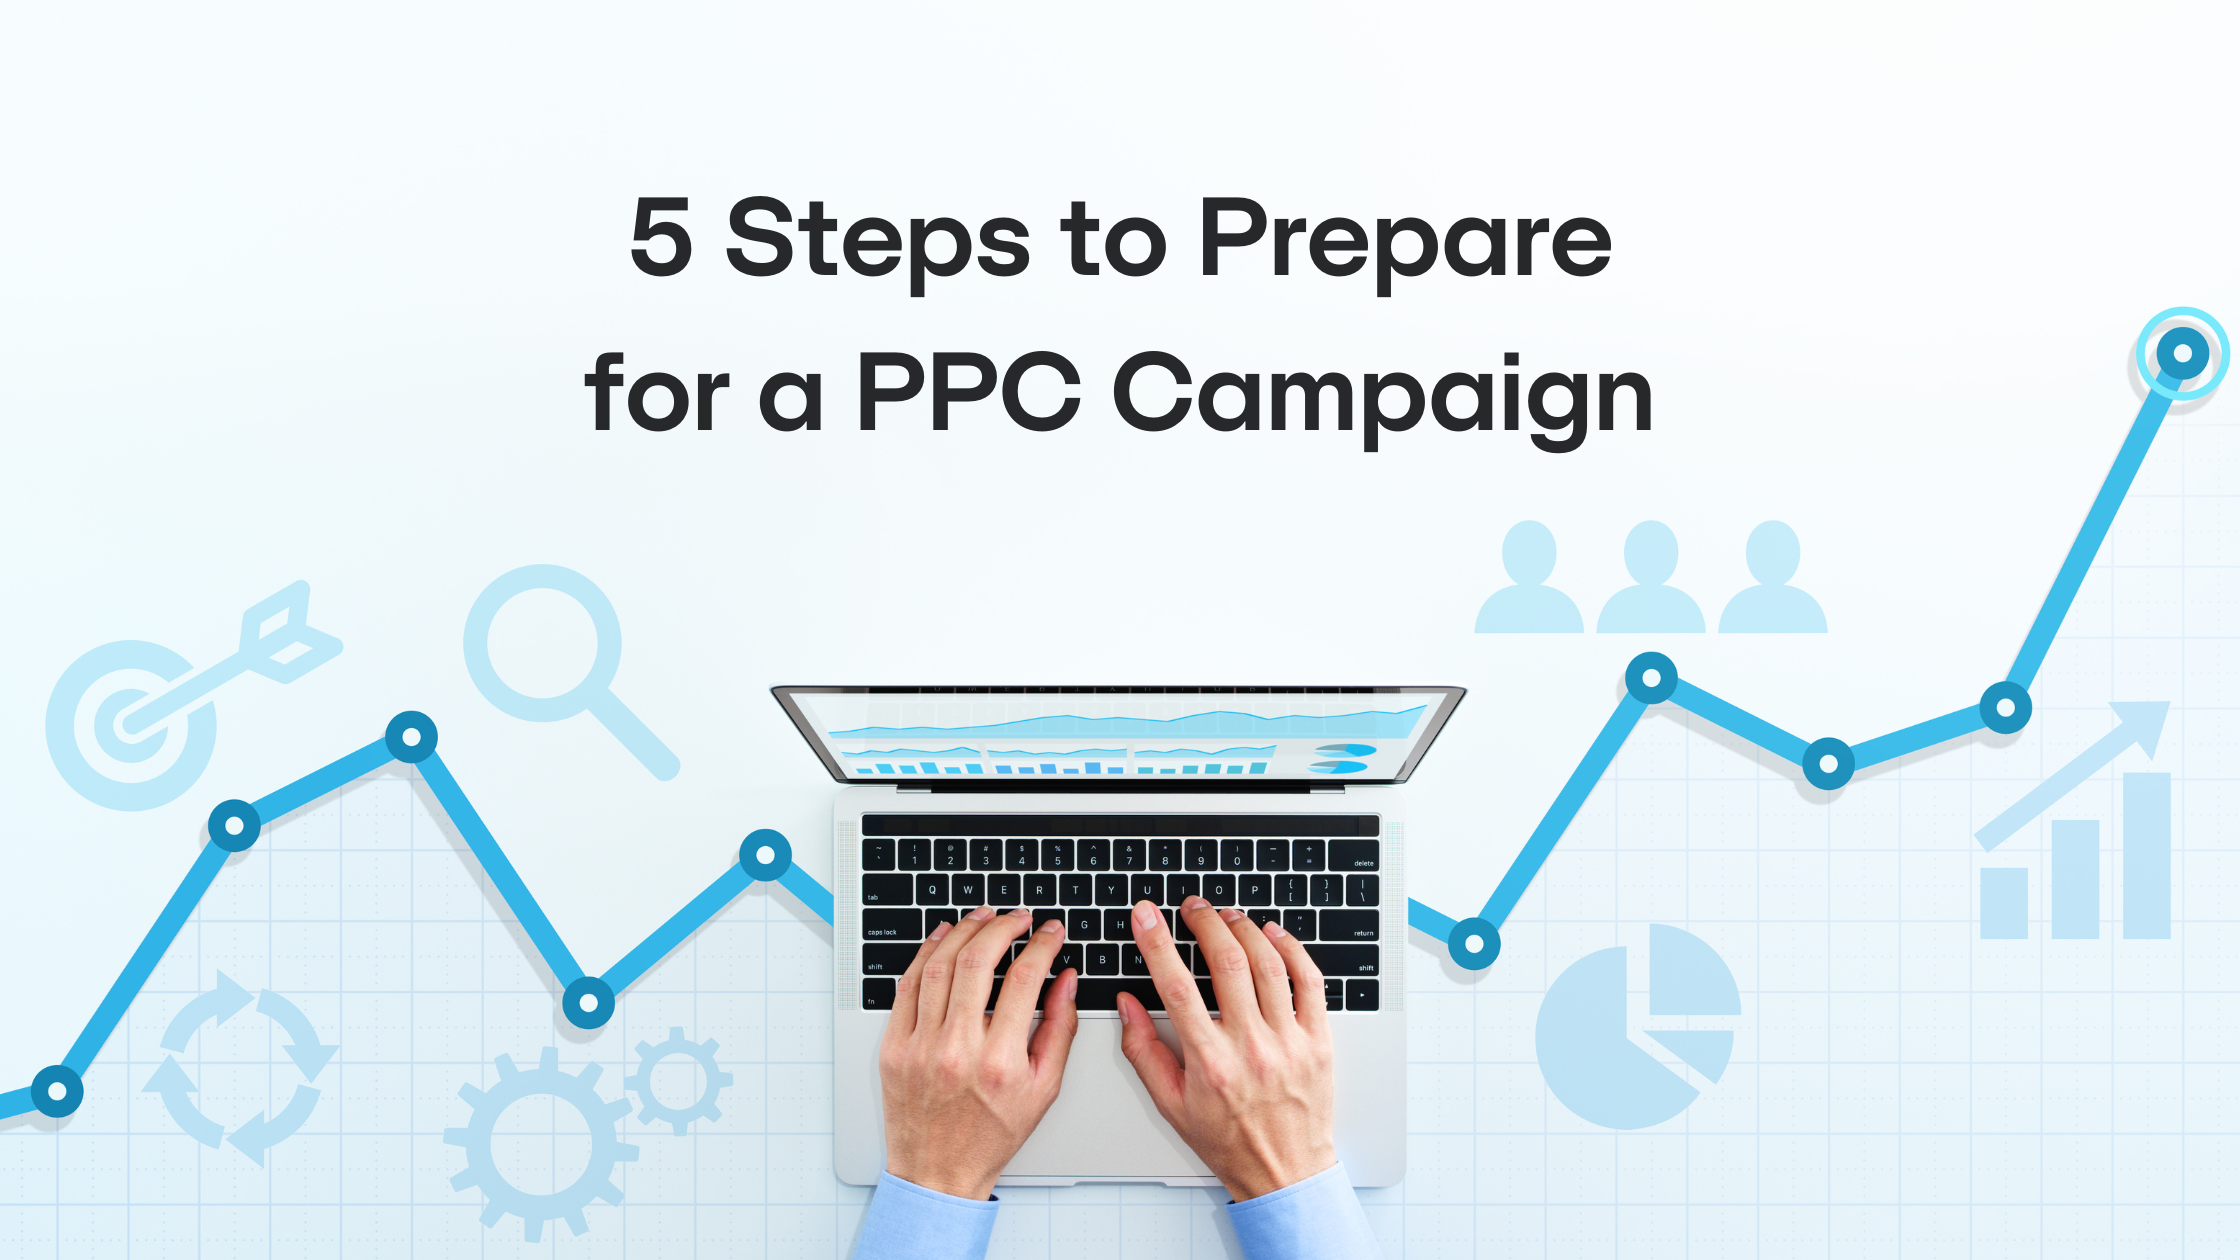 5 Steps to Prepare for a PPC Campaign